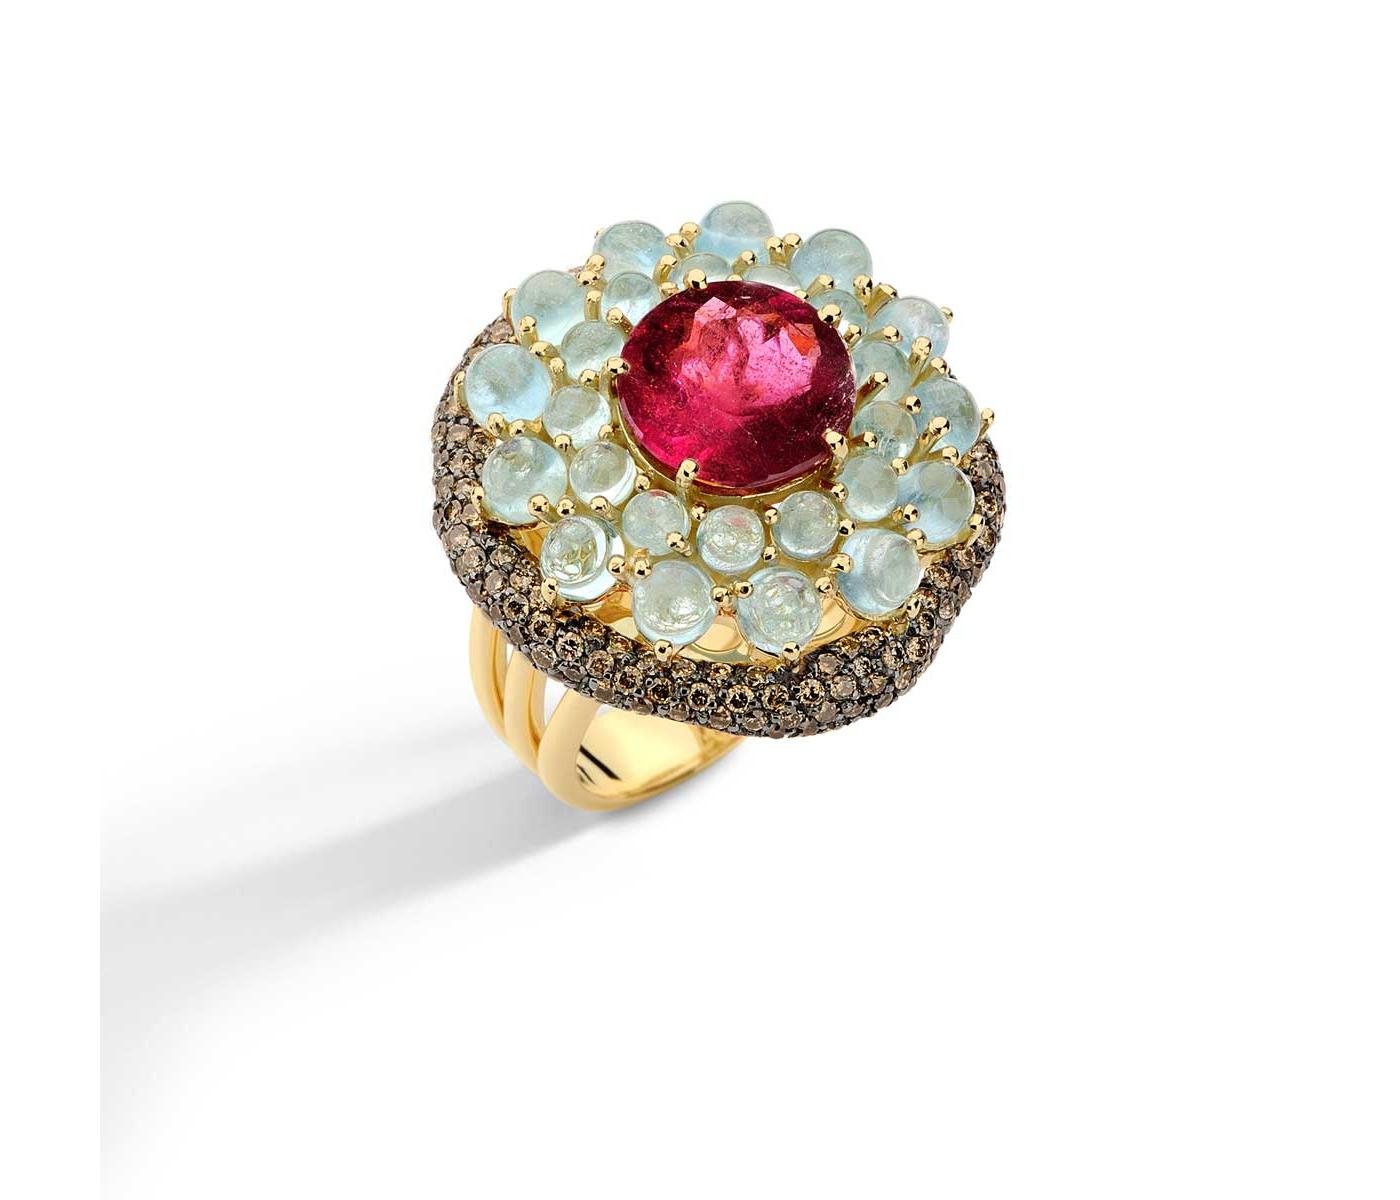 Ring by Brumani